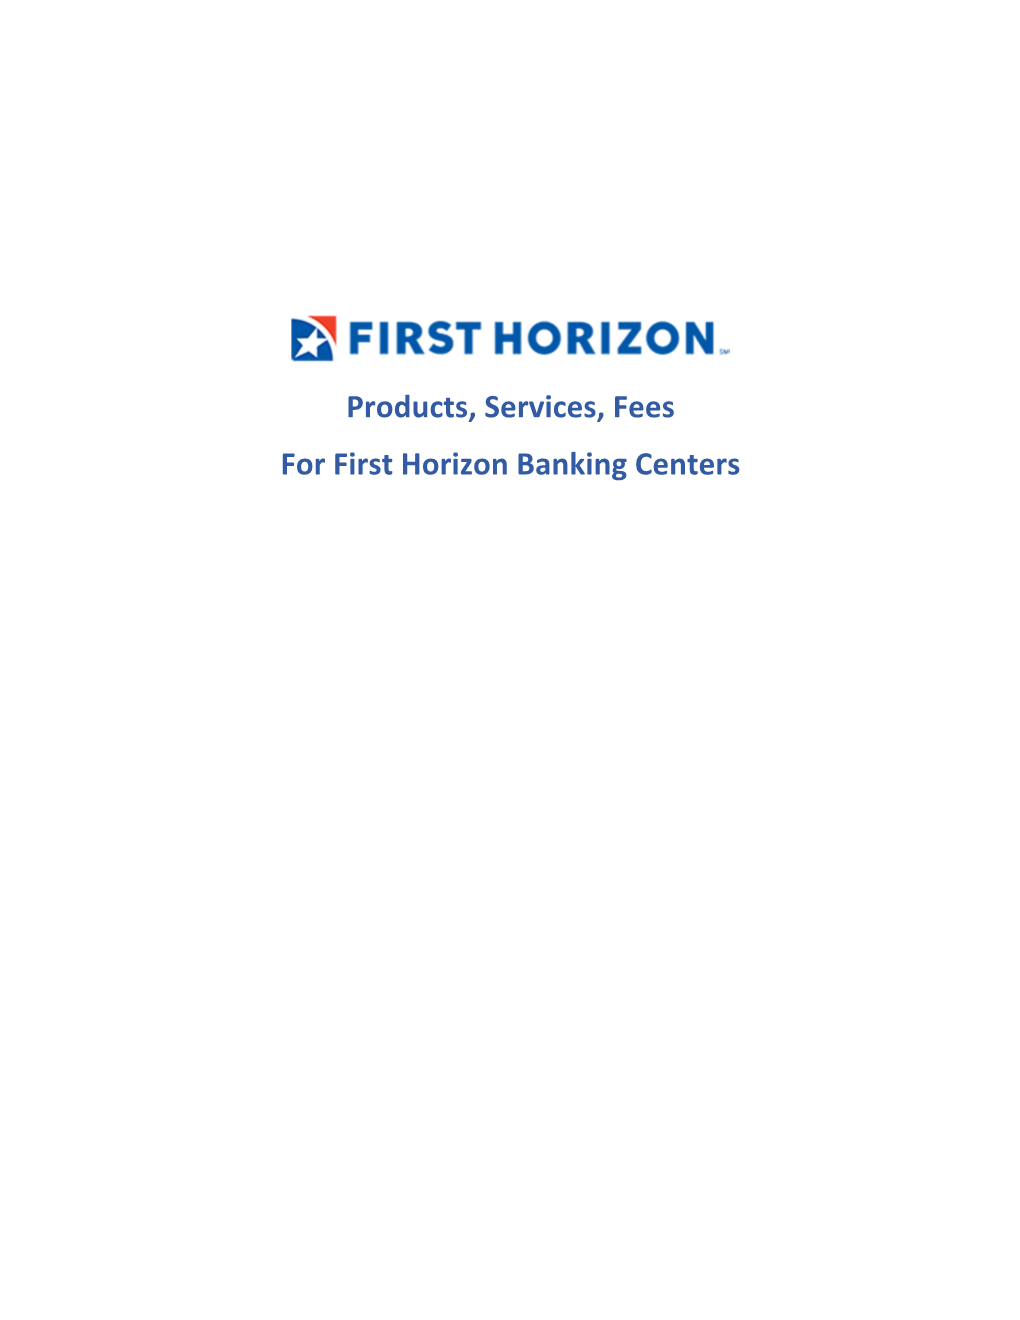 Products, Services, Fees for First Horizon Banking Centers